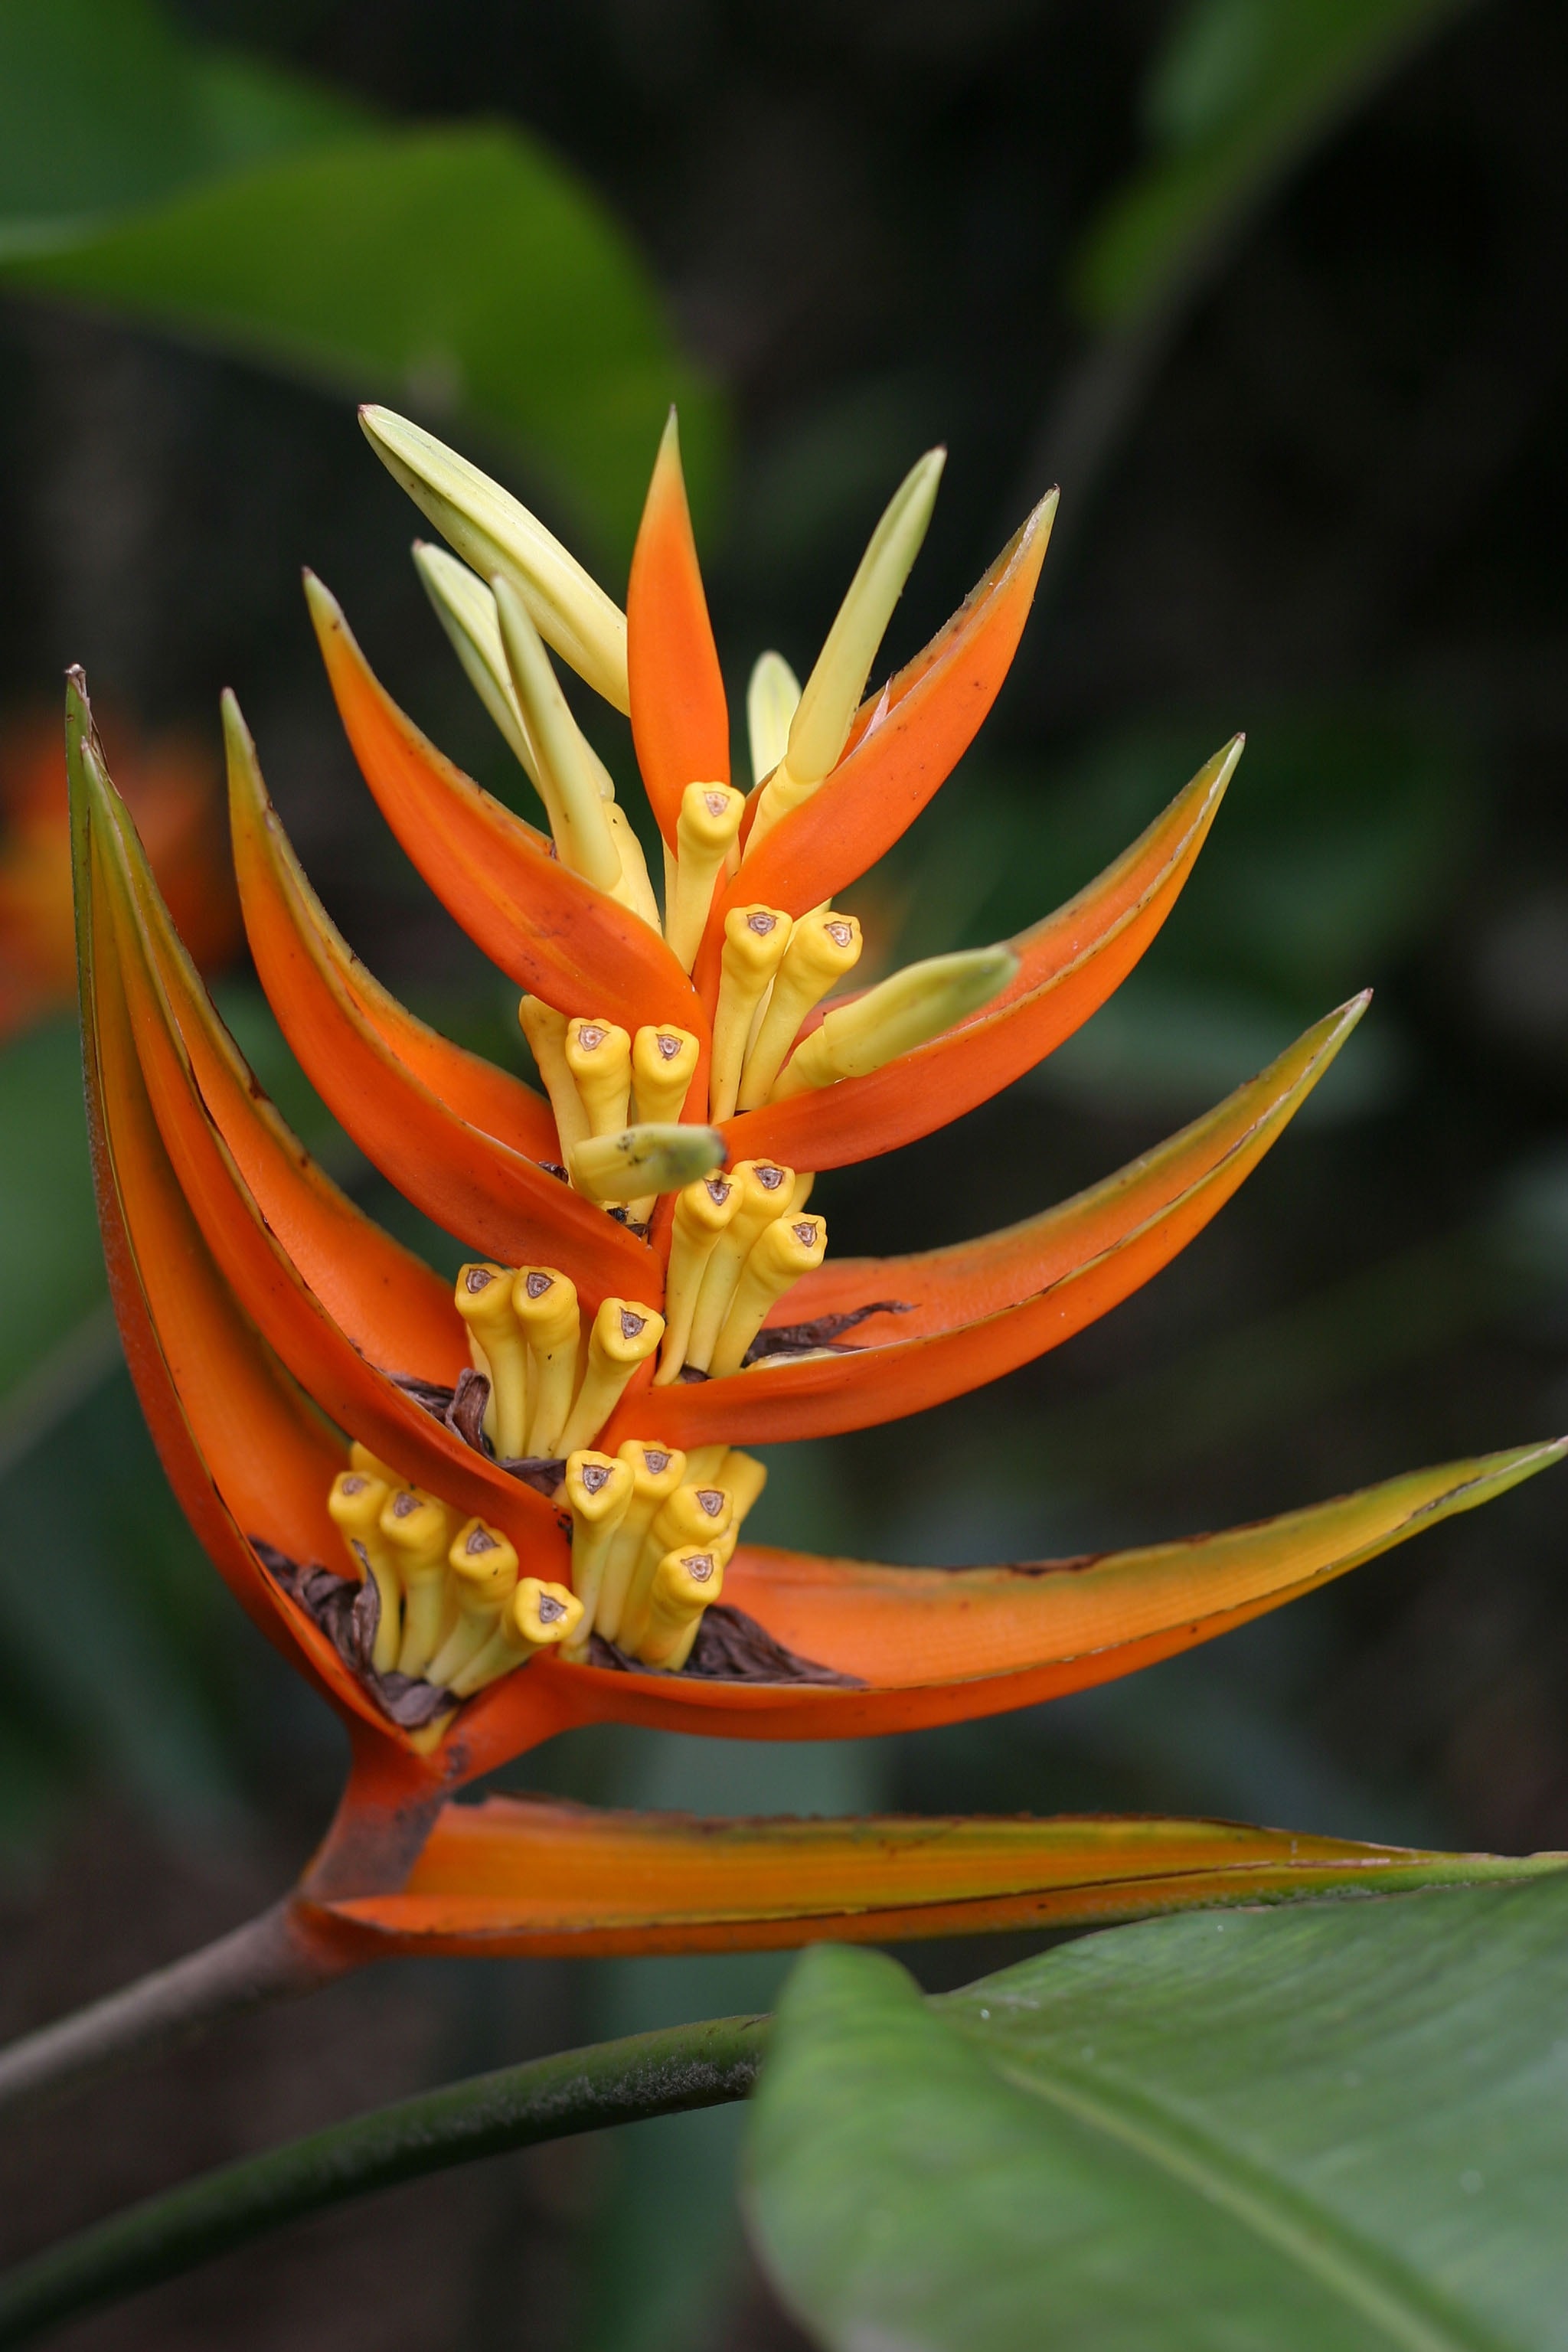 orange heliconia in bloom close-up photo